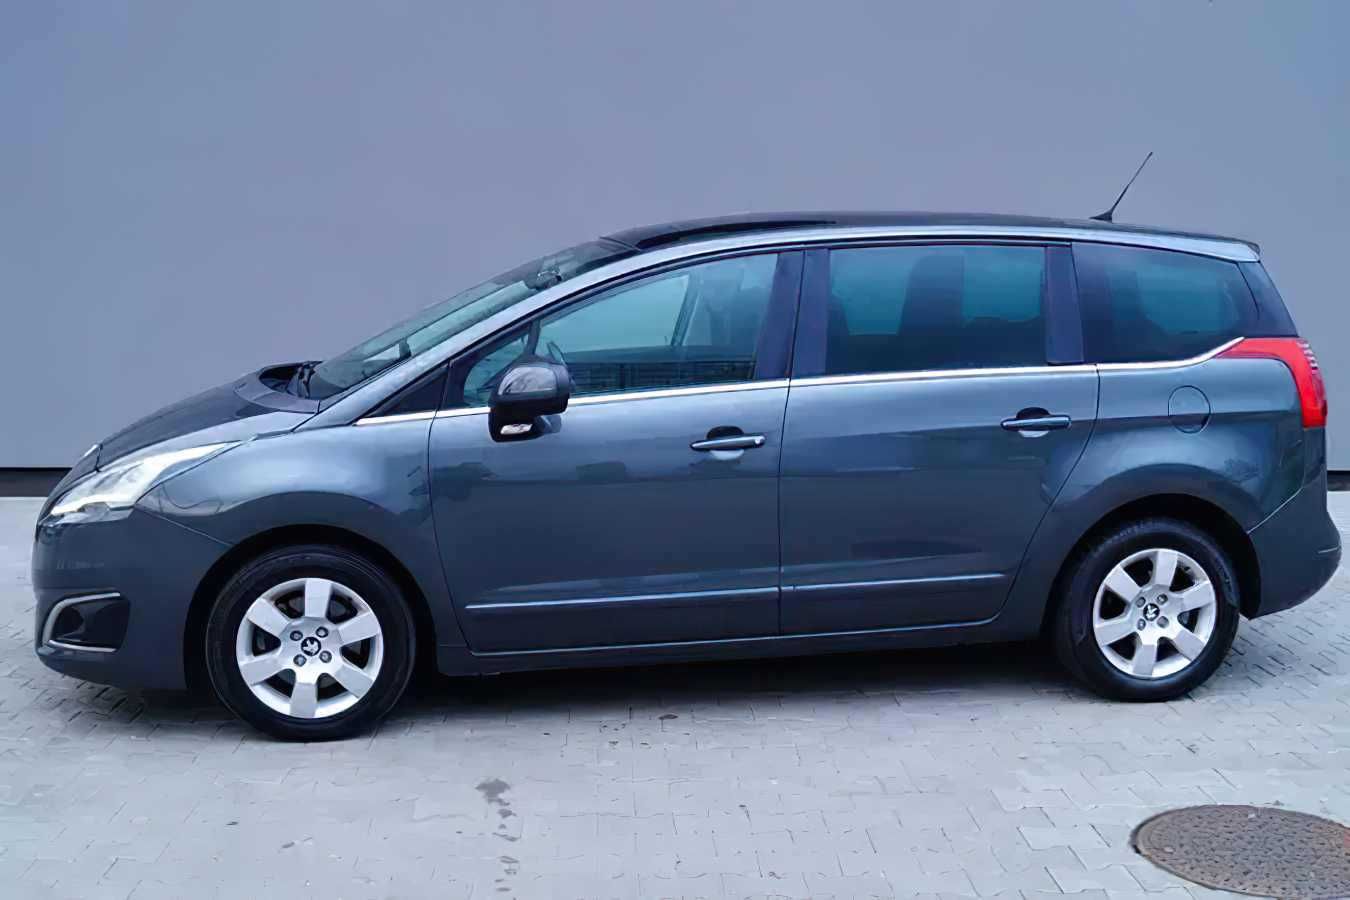 Peugeot 5008 2.0 HDi Business Line 7os